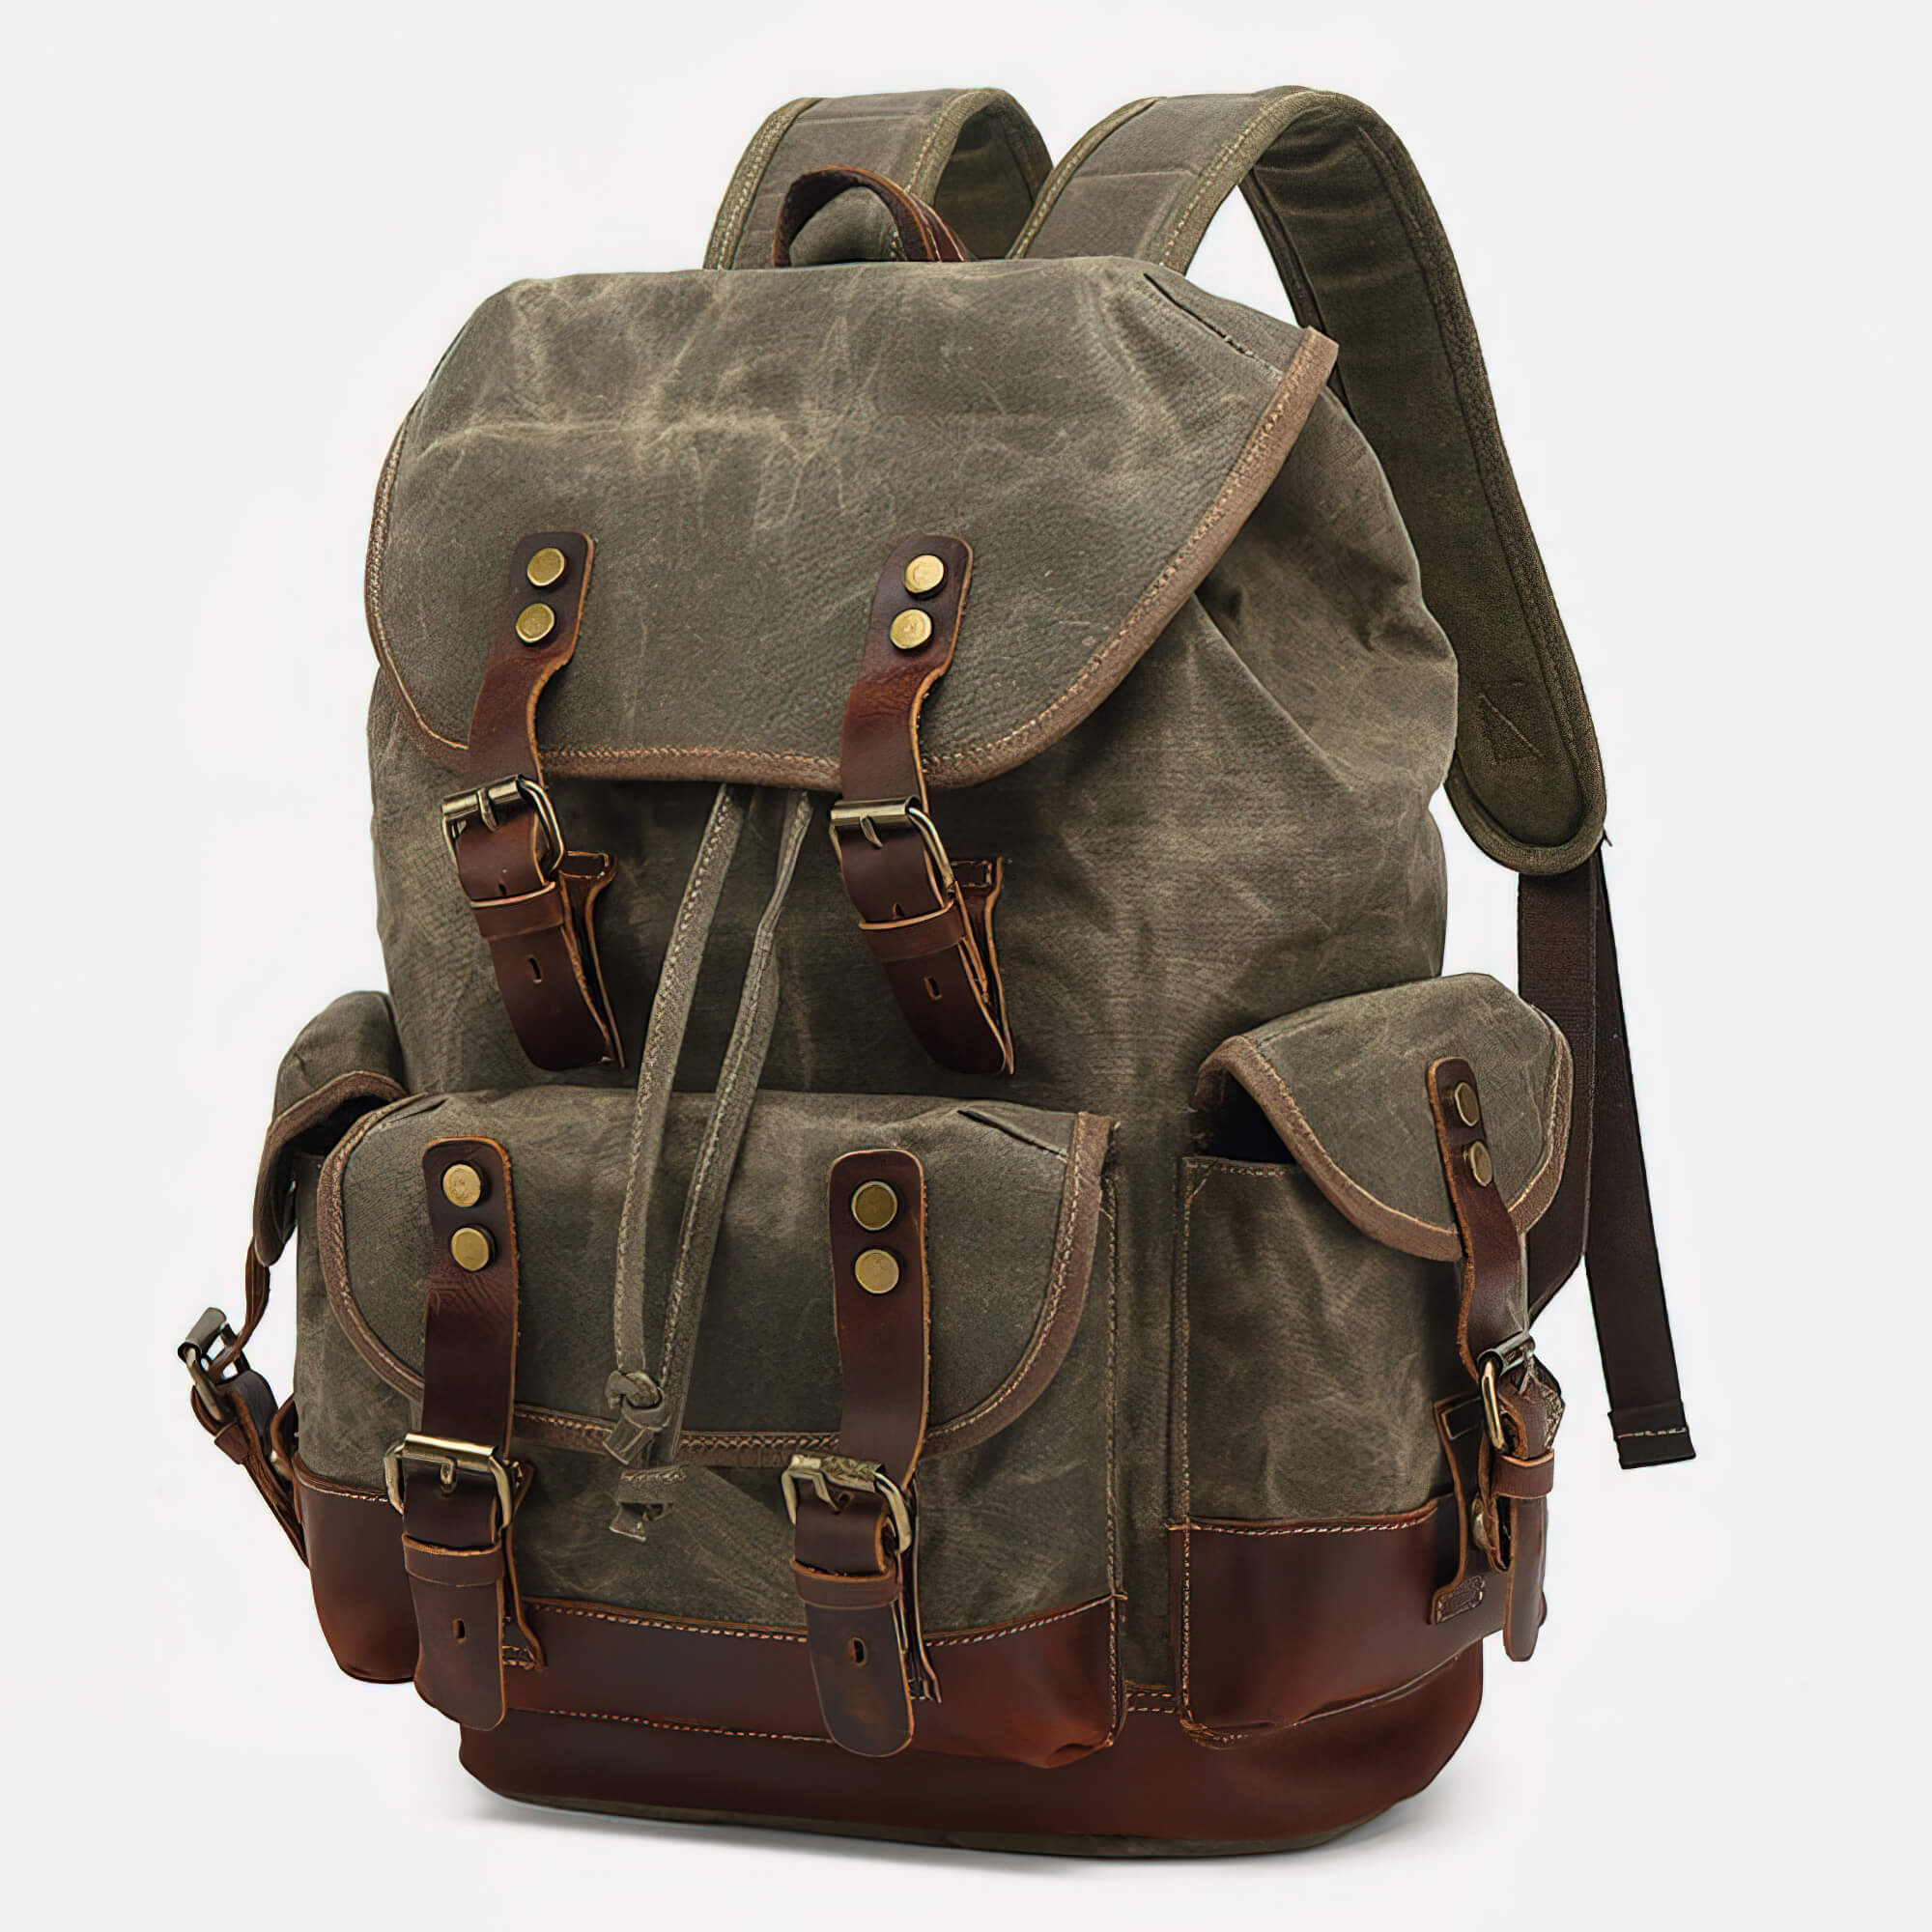 Waxed Canvas Backpack Rucksack 30L - Large Capacity, Genuine ...